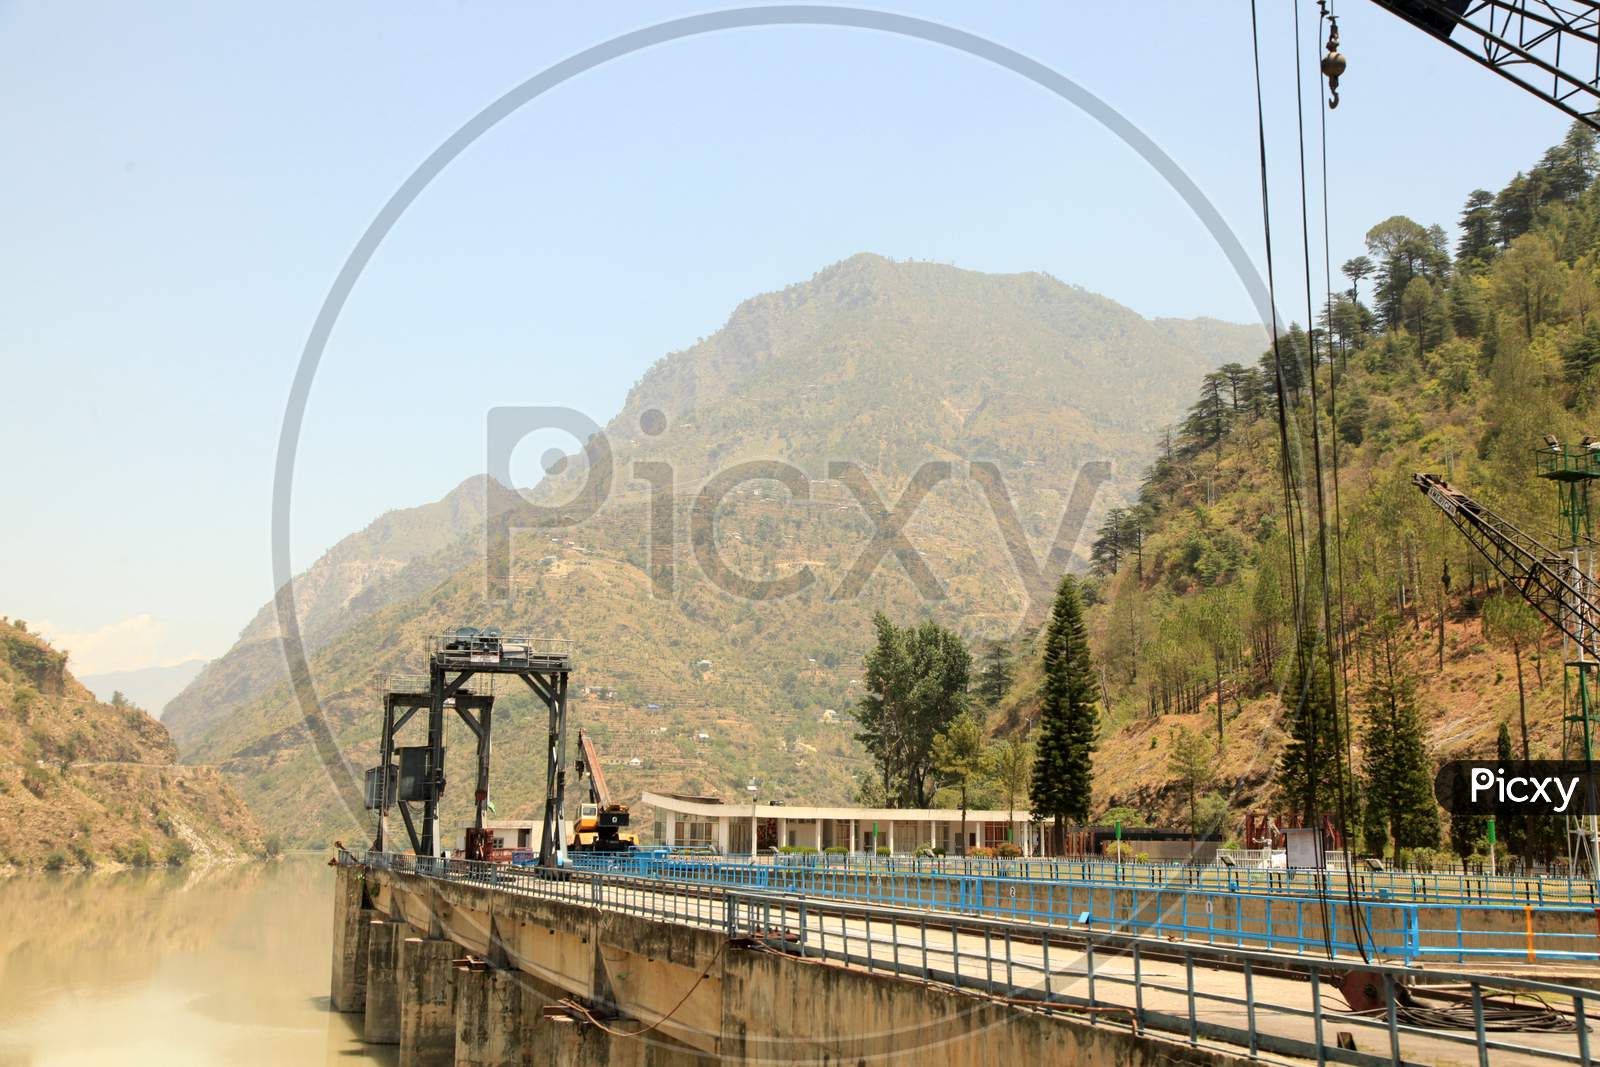 Mountains of Himachal Pradesh with Bridge in the Foreground